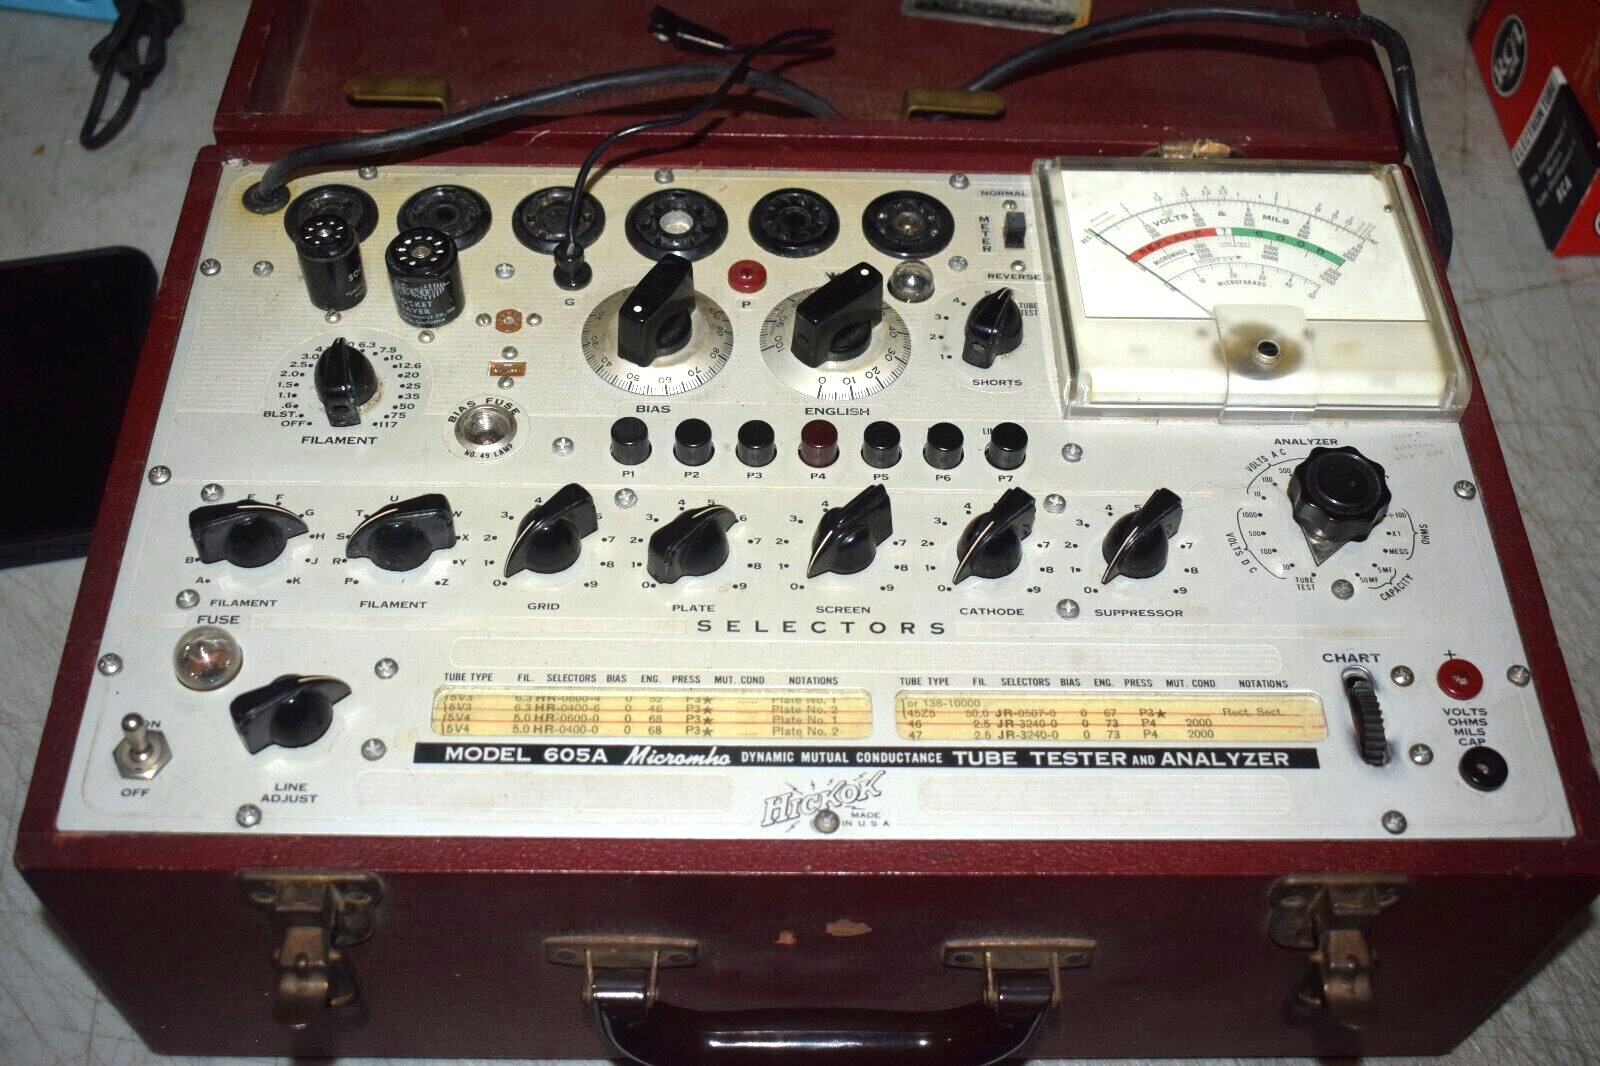 Clean Hickok 605A Tube Tester - Tested Several Tubes w/Great Results